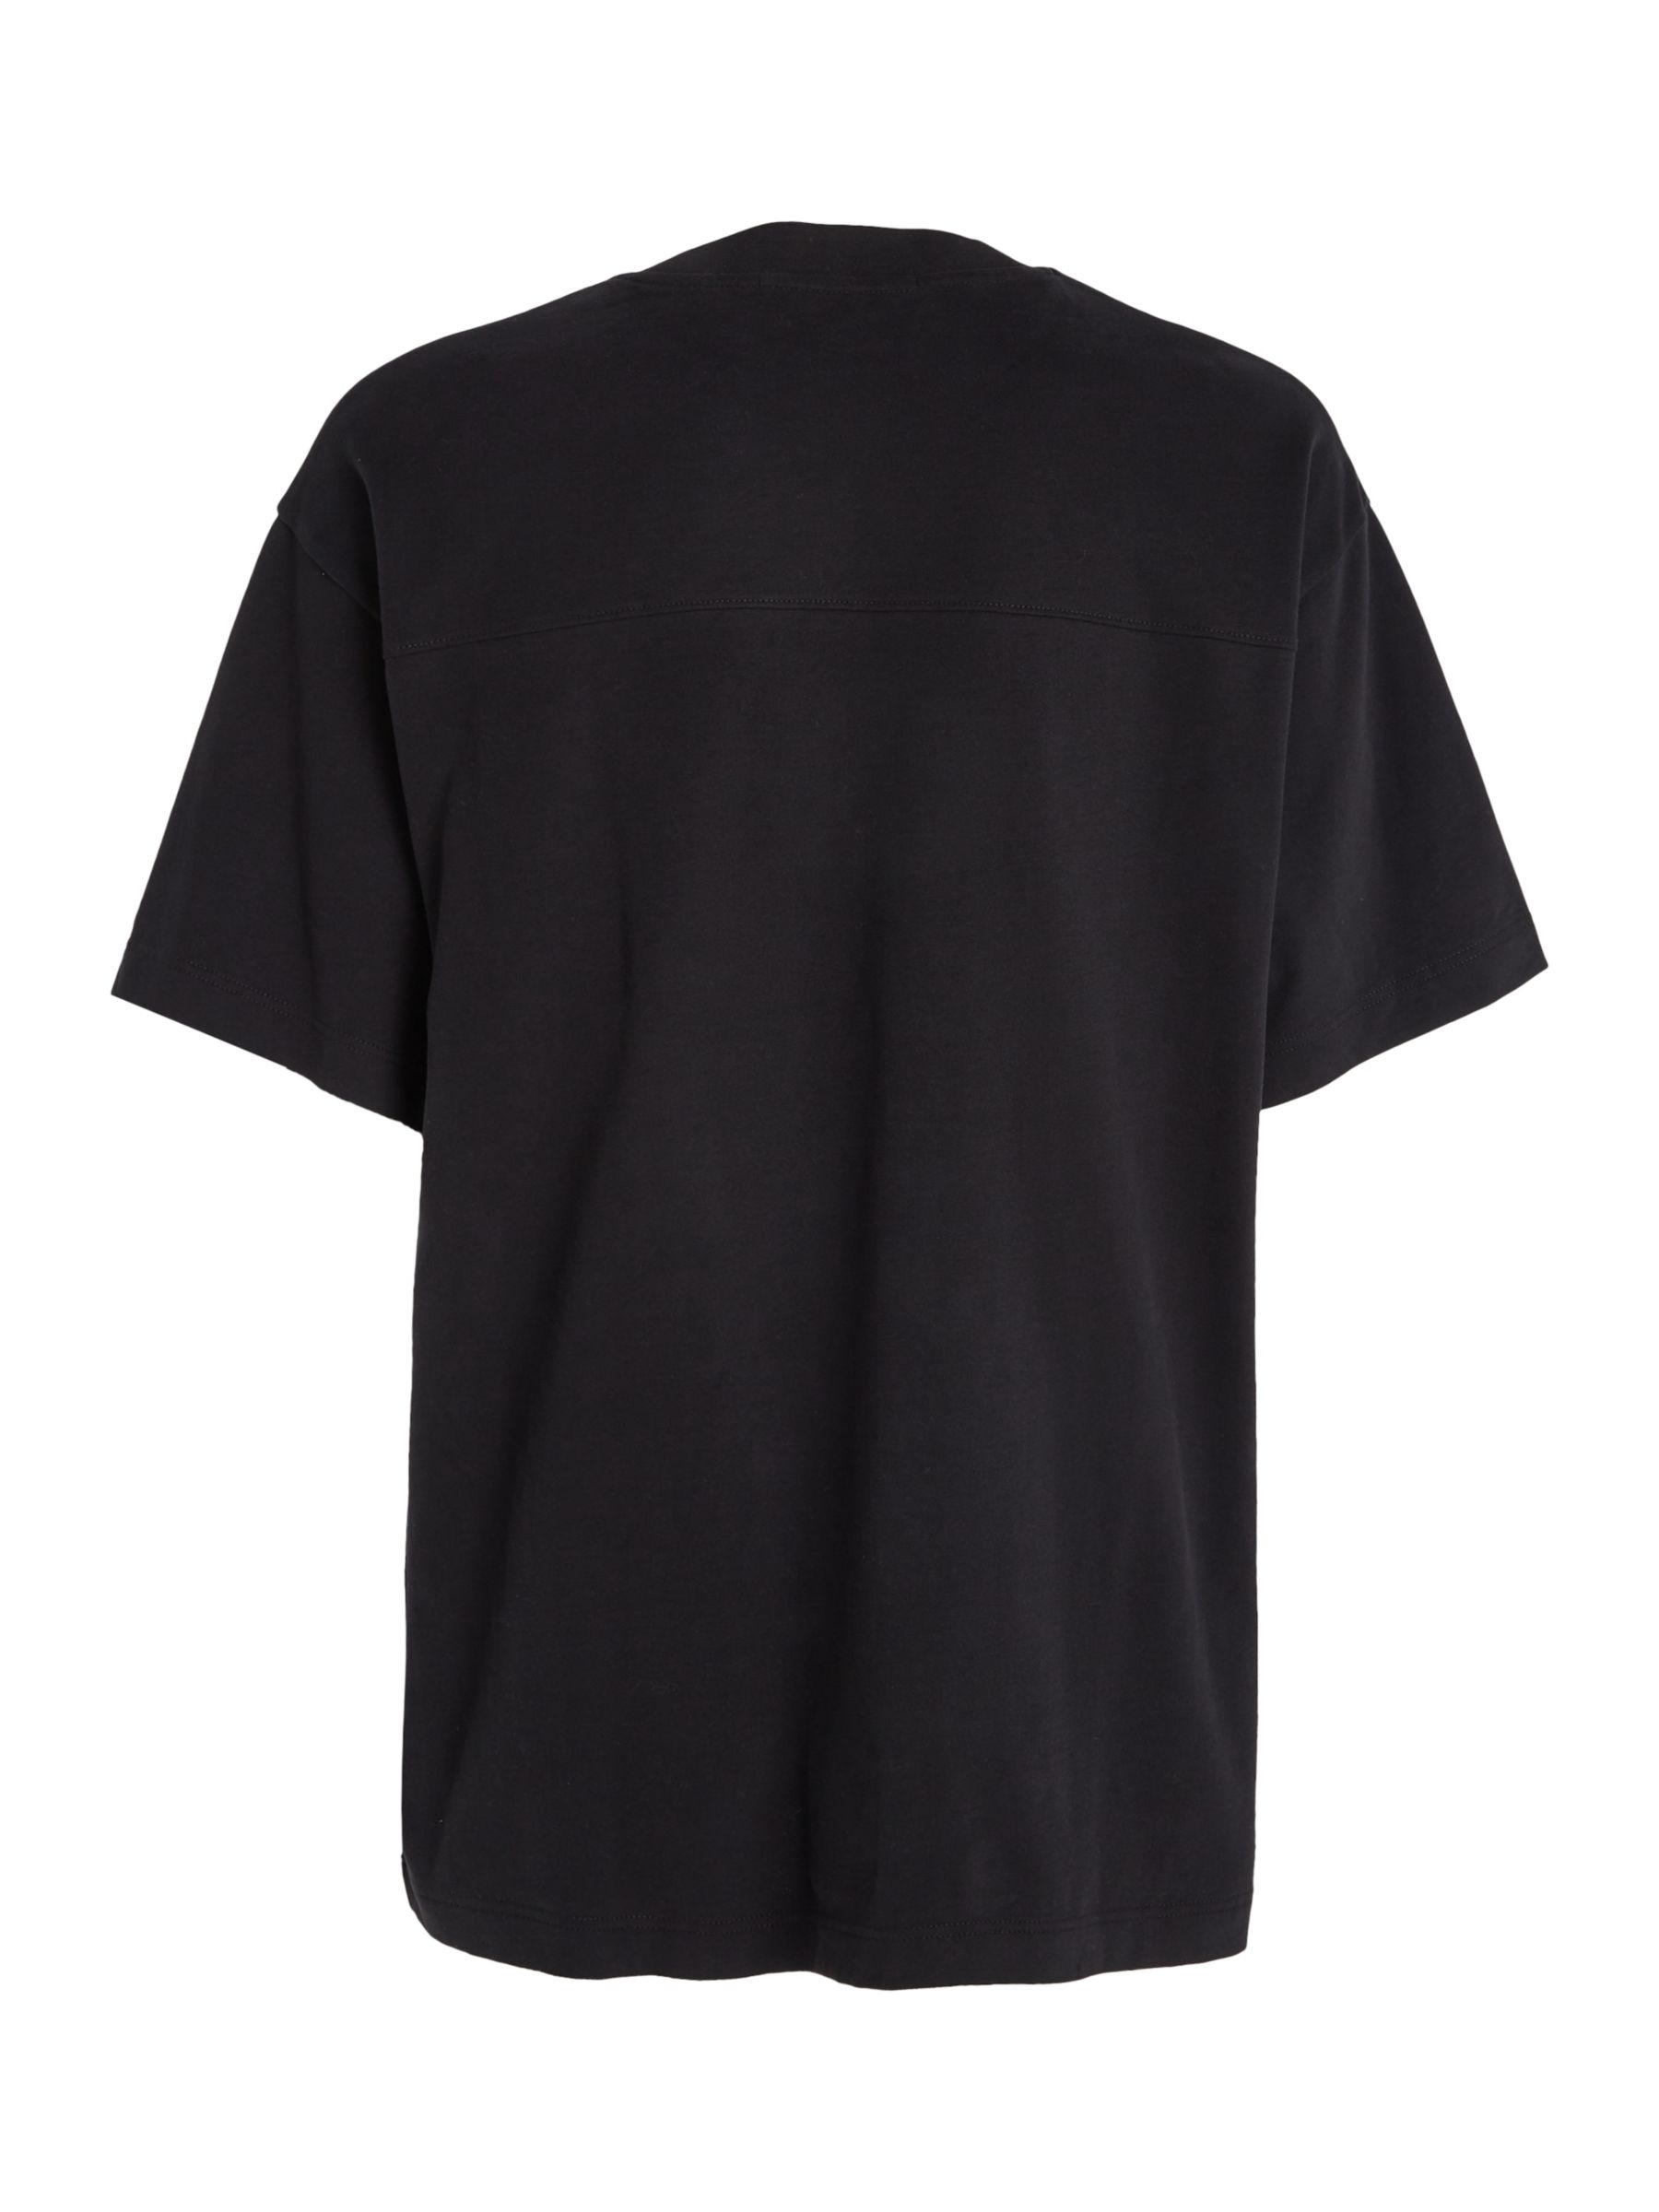 T-Shirt Calvin Klein Jeans Stacked Archival Tee Black for Man, J30J323759BEH